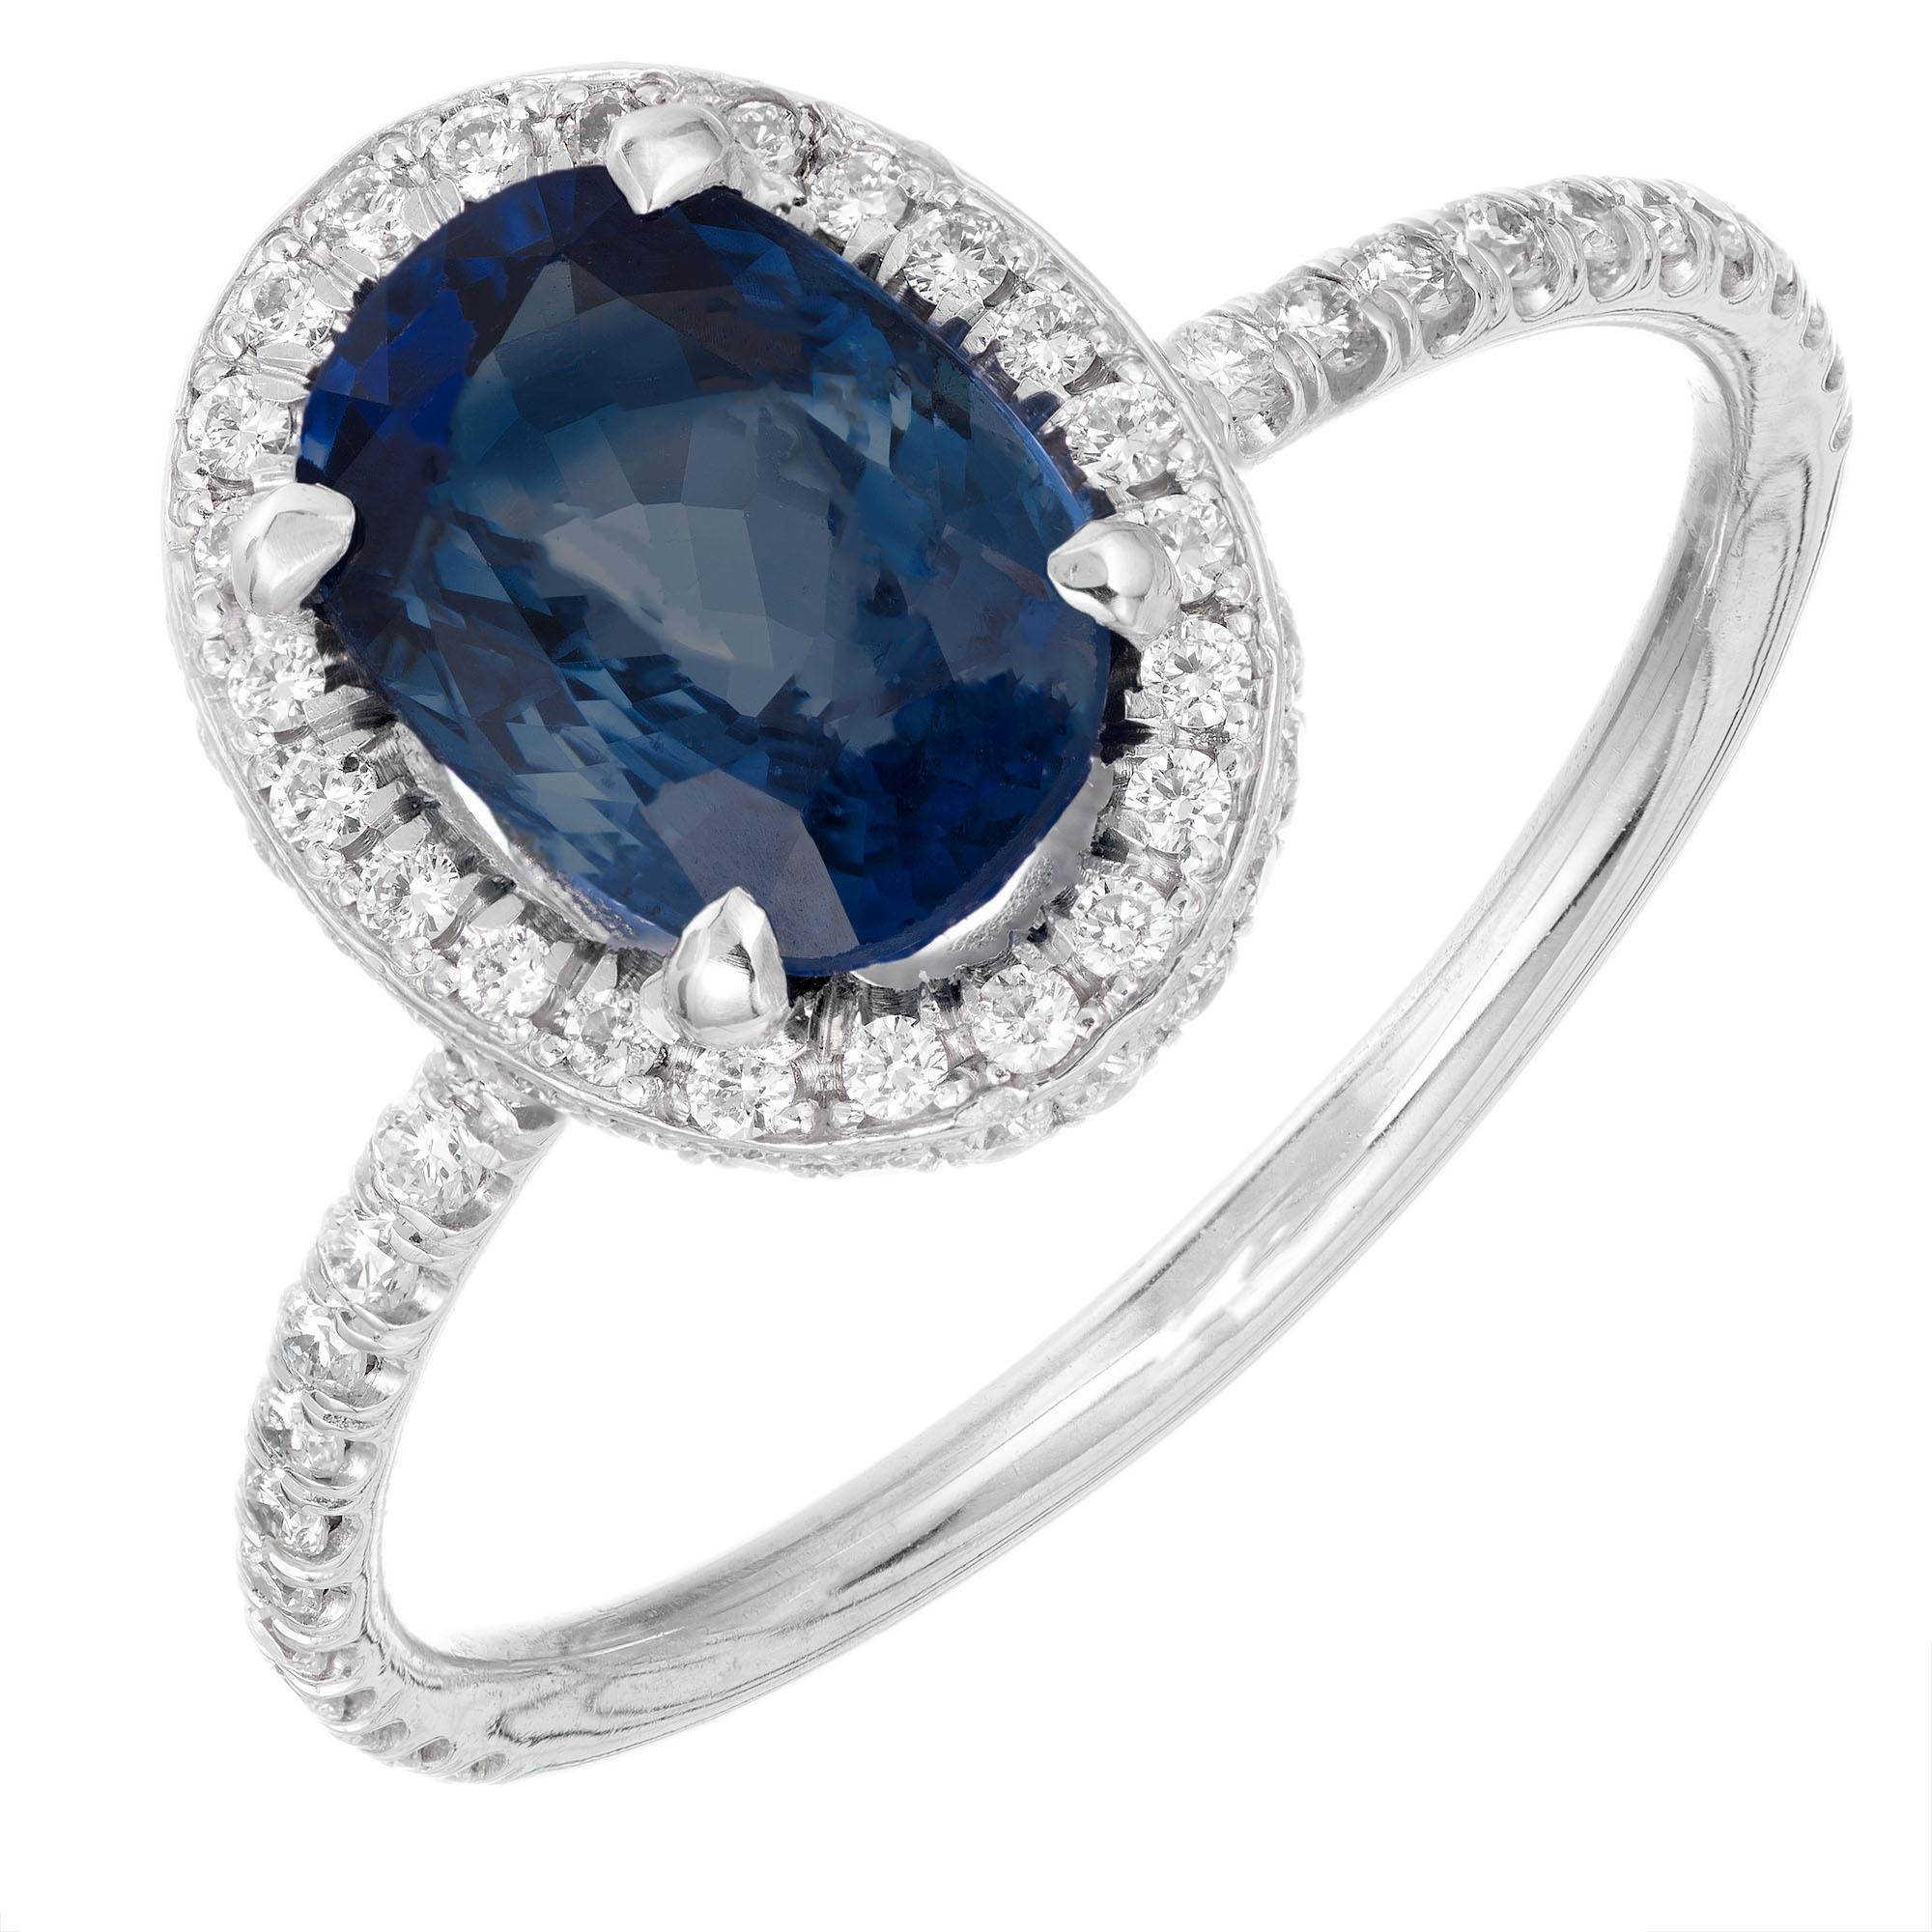 Blue GIA certified 2.02 carat oval sapphire and diamond engagement ring. Oval center stone with a halo of round diamonds. Designed and created in the Peter Suchy Workshop.

1 oval blue sapphire VS2, approx. 2.02cts GIA Certificate # 6204733832
93